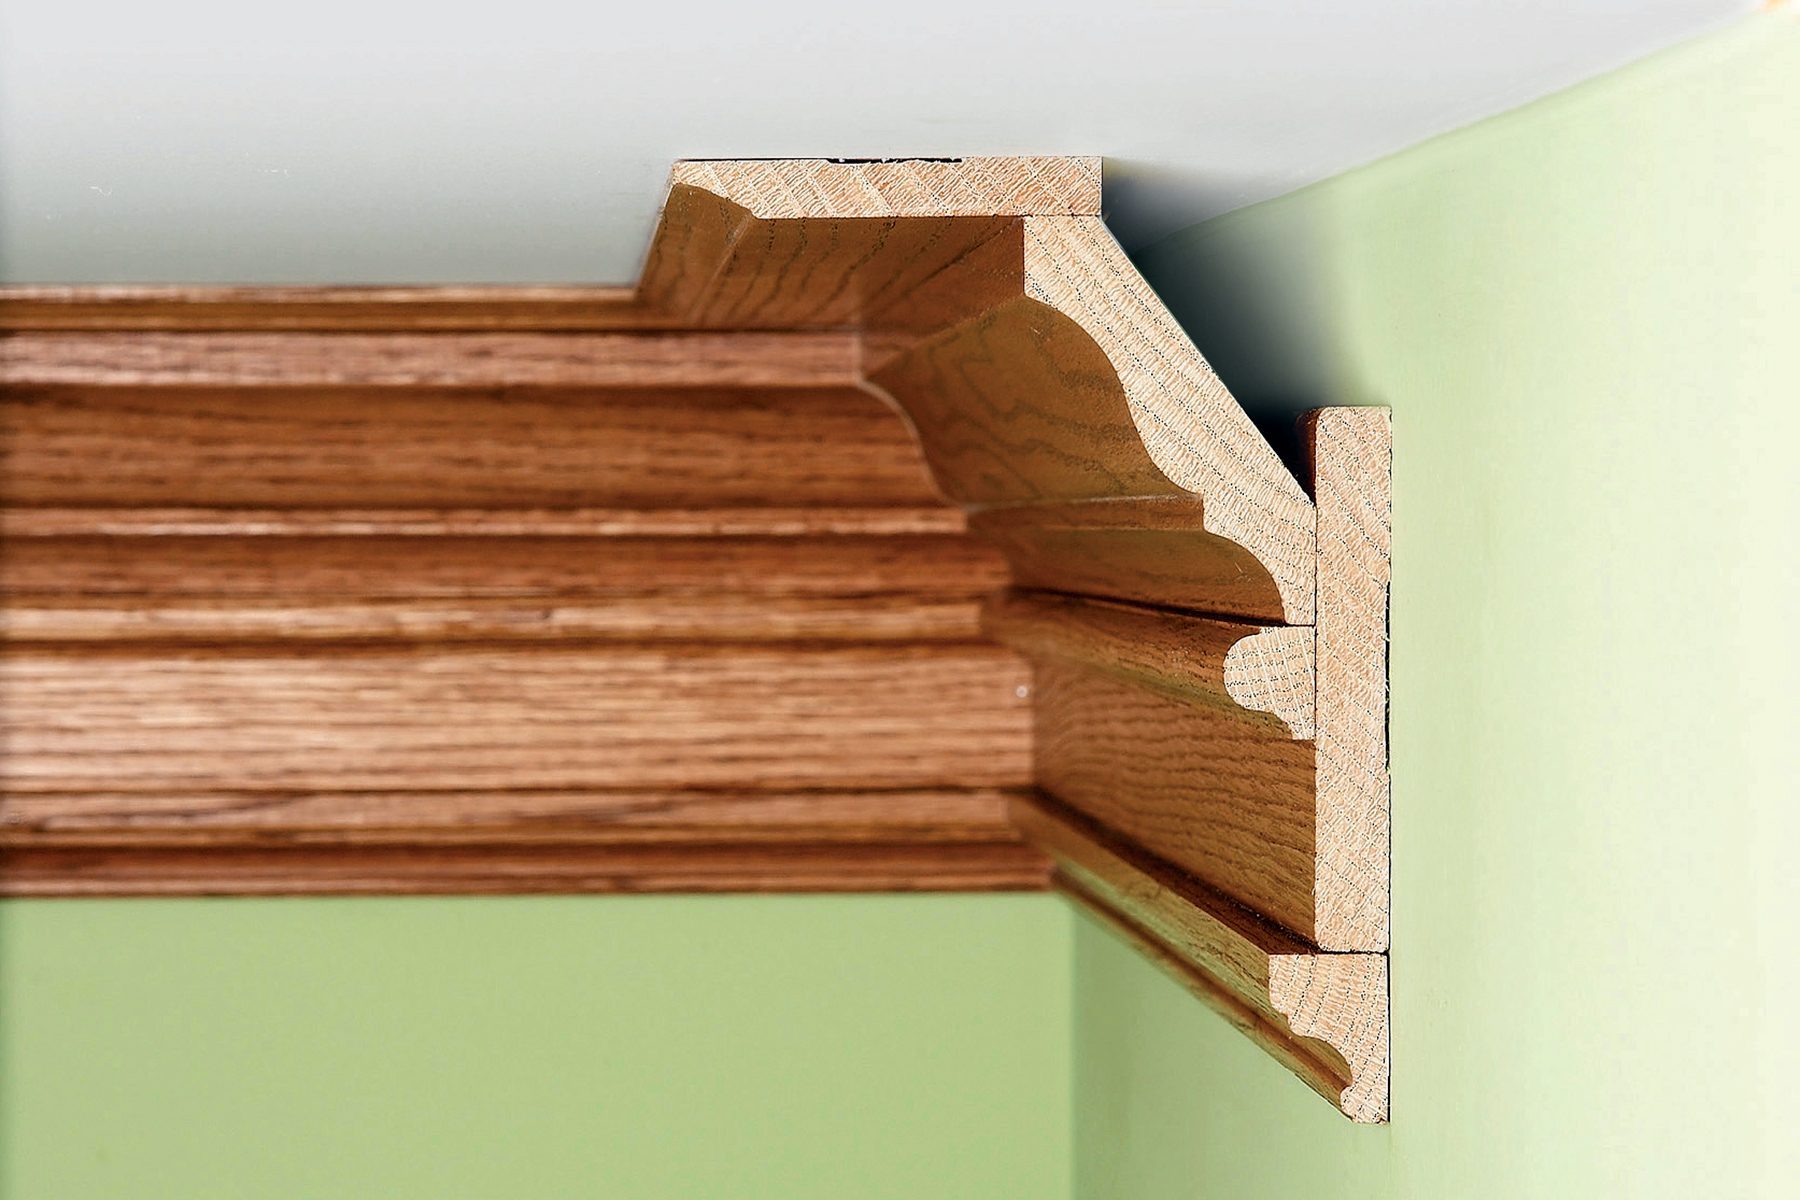 Close-up of a finely crafted wooden crown molding installed at a ceiling corner, with detailed profiles and layered sections. The molding is a light brown wood tone contrasting against the light green wall and white ceiling.